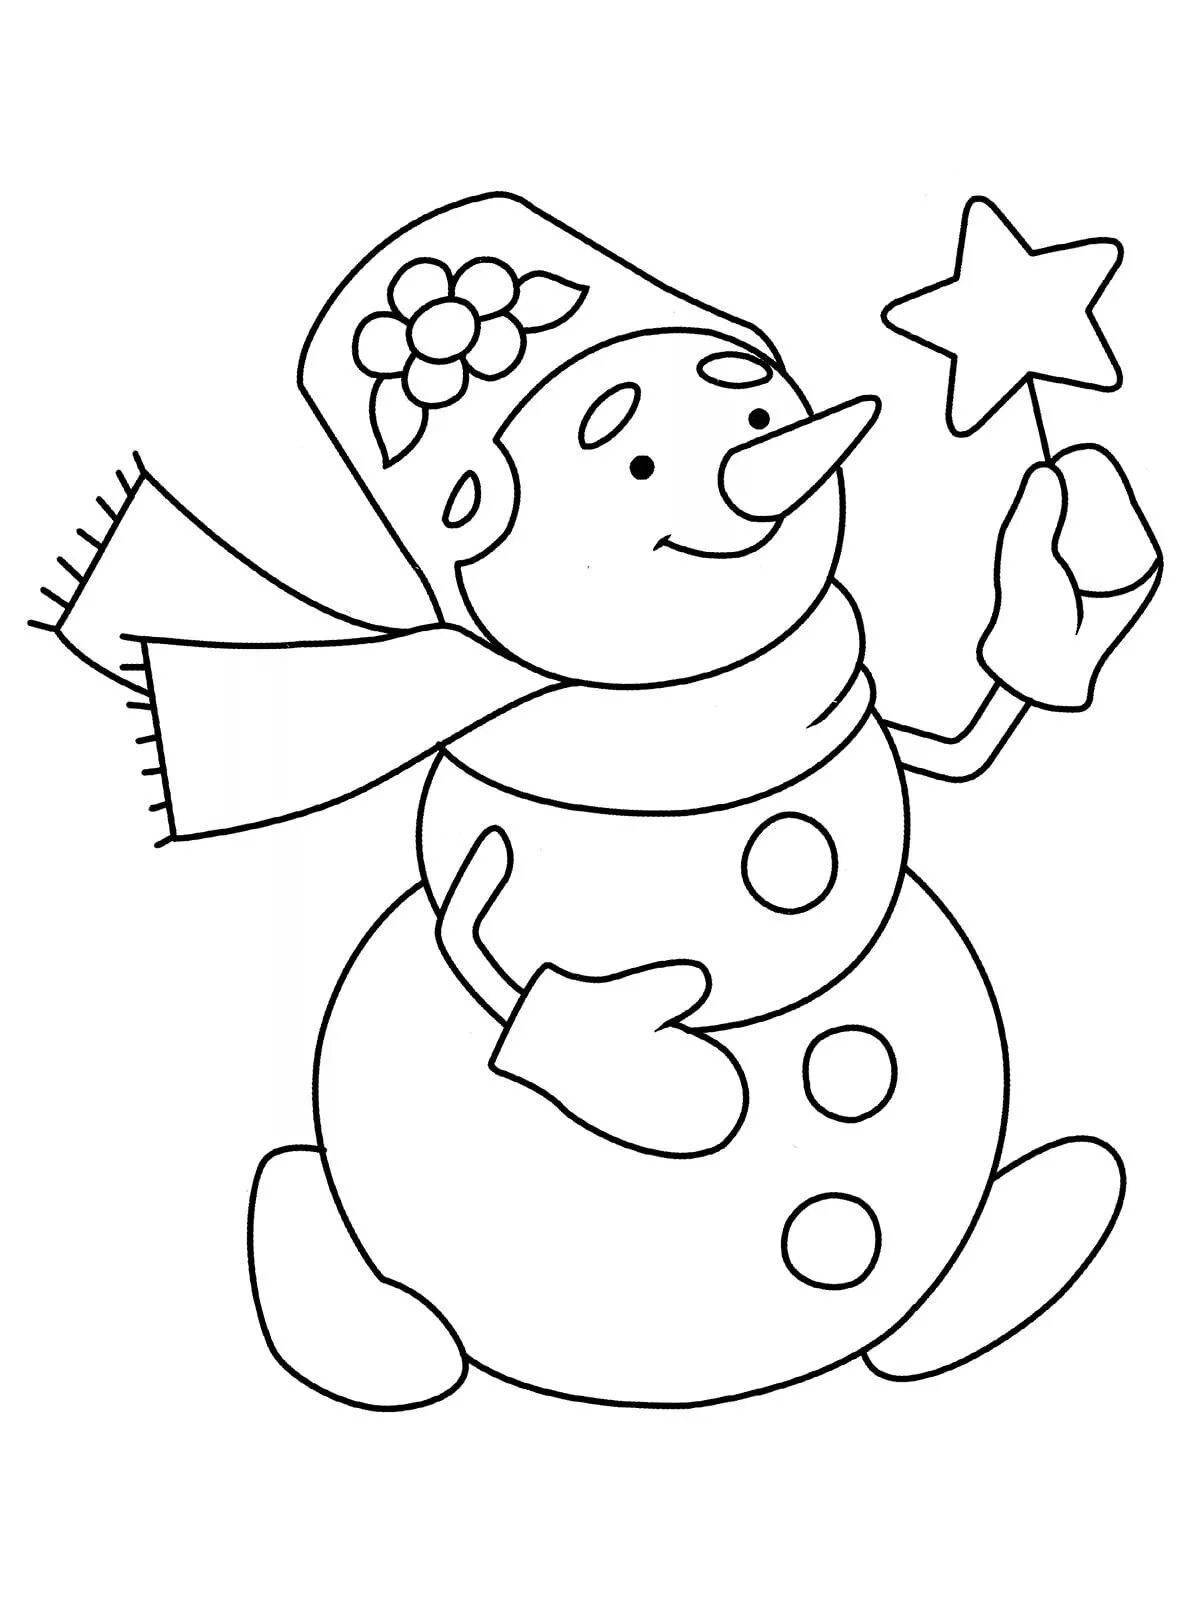 Colorful snowman coloring page